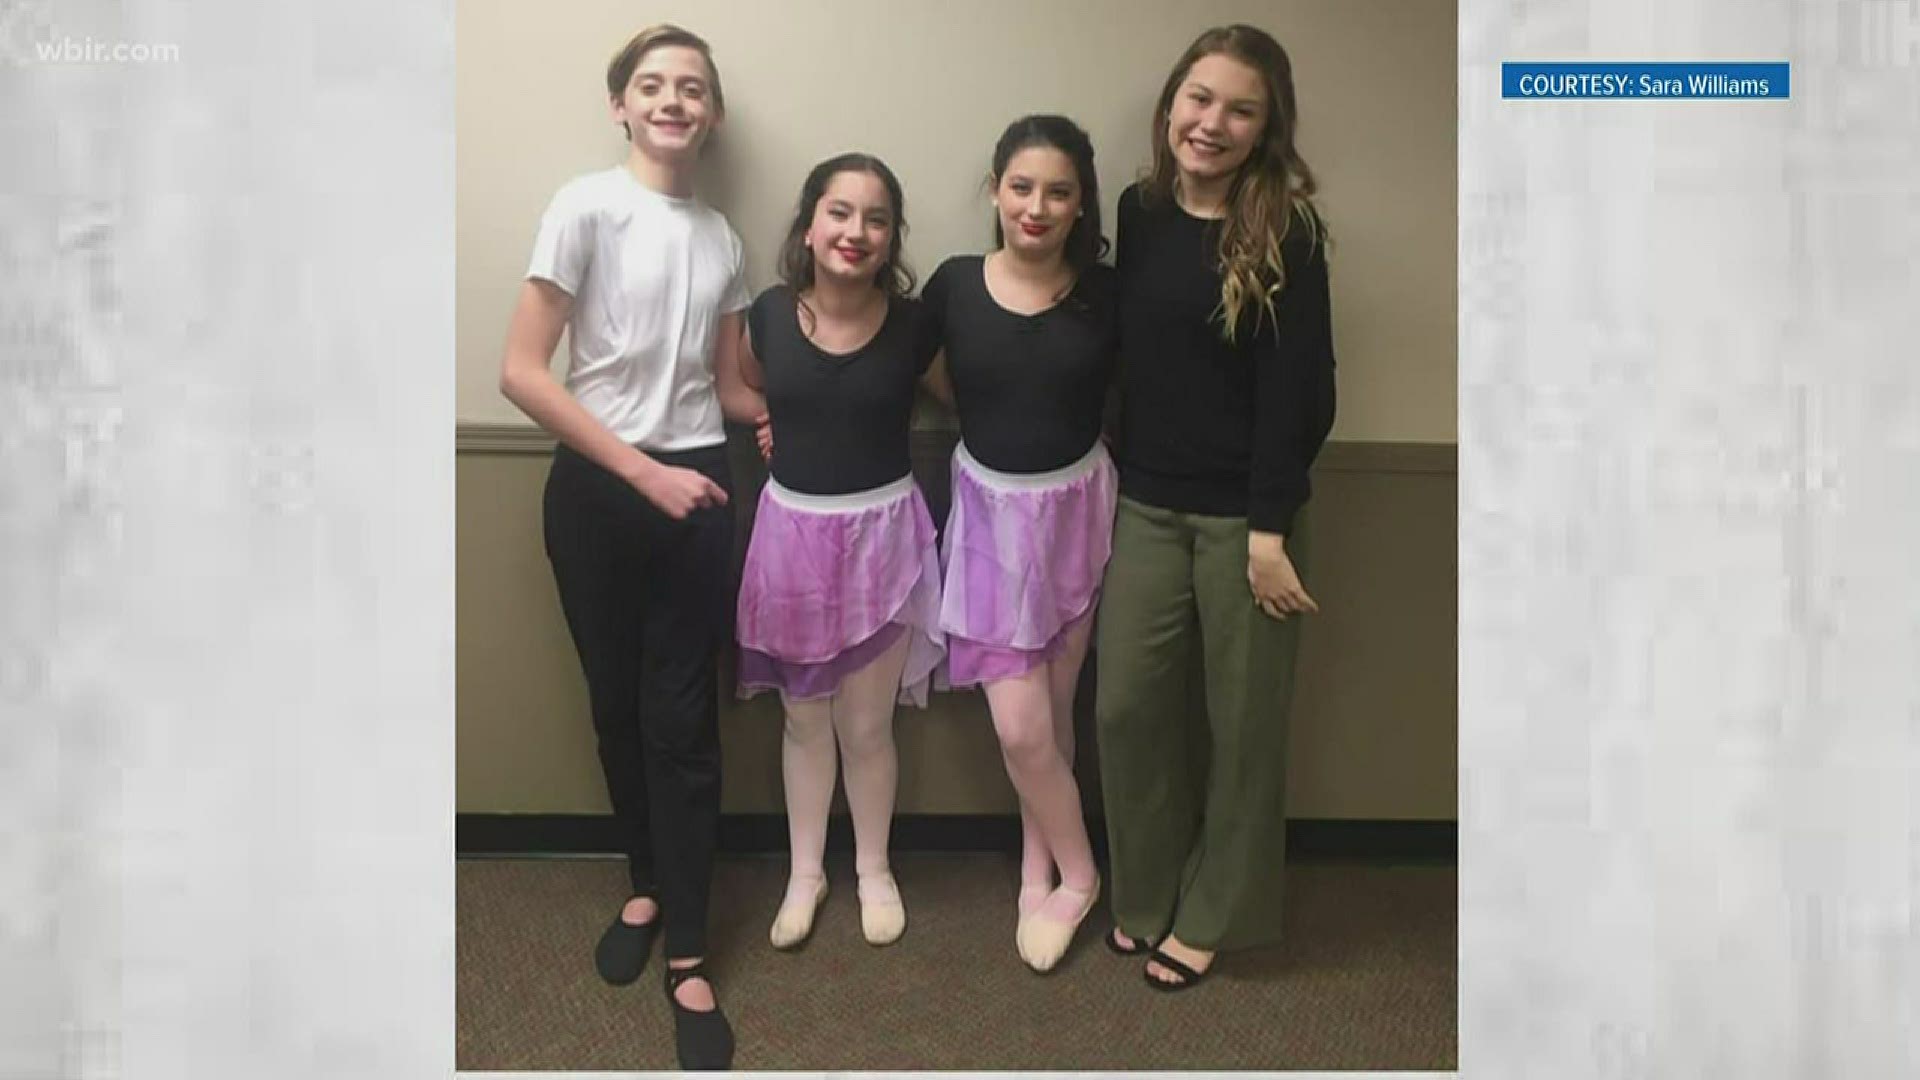 Student teaches dance to girls who may not otherwise have the opportunity to take classes